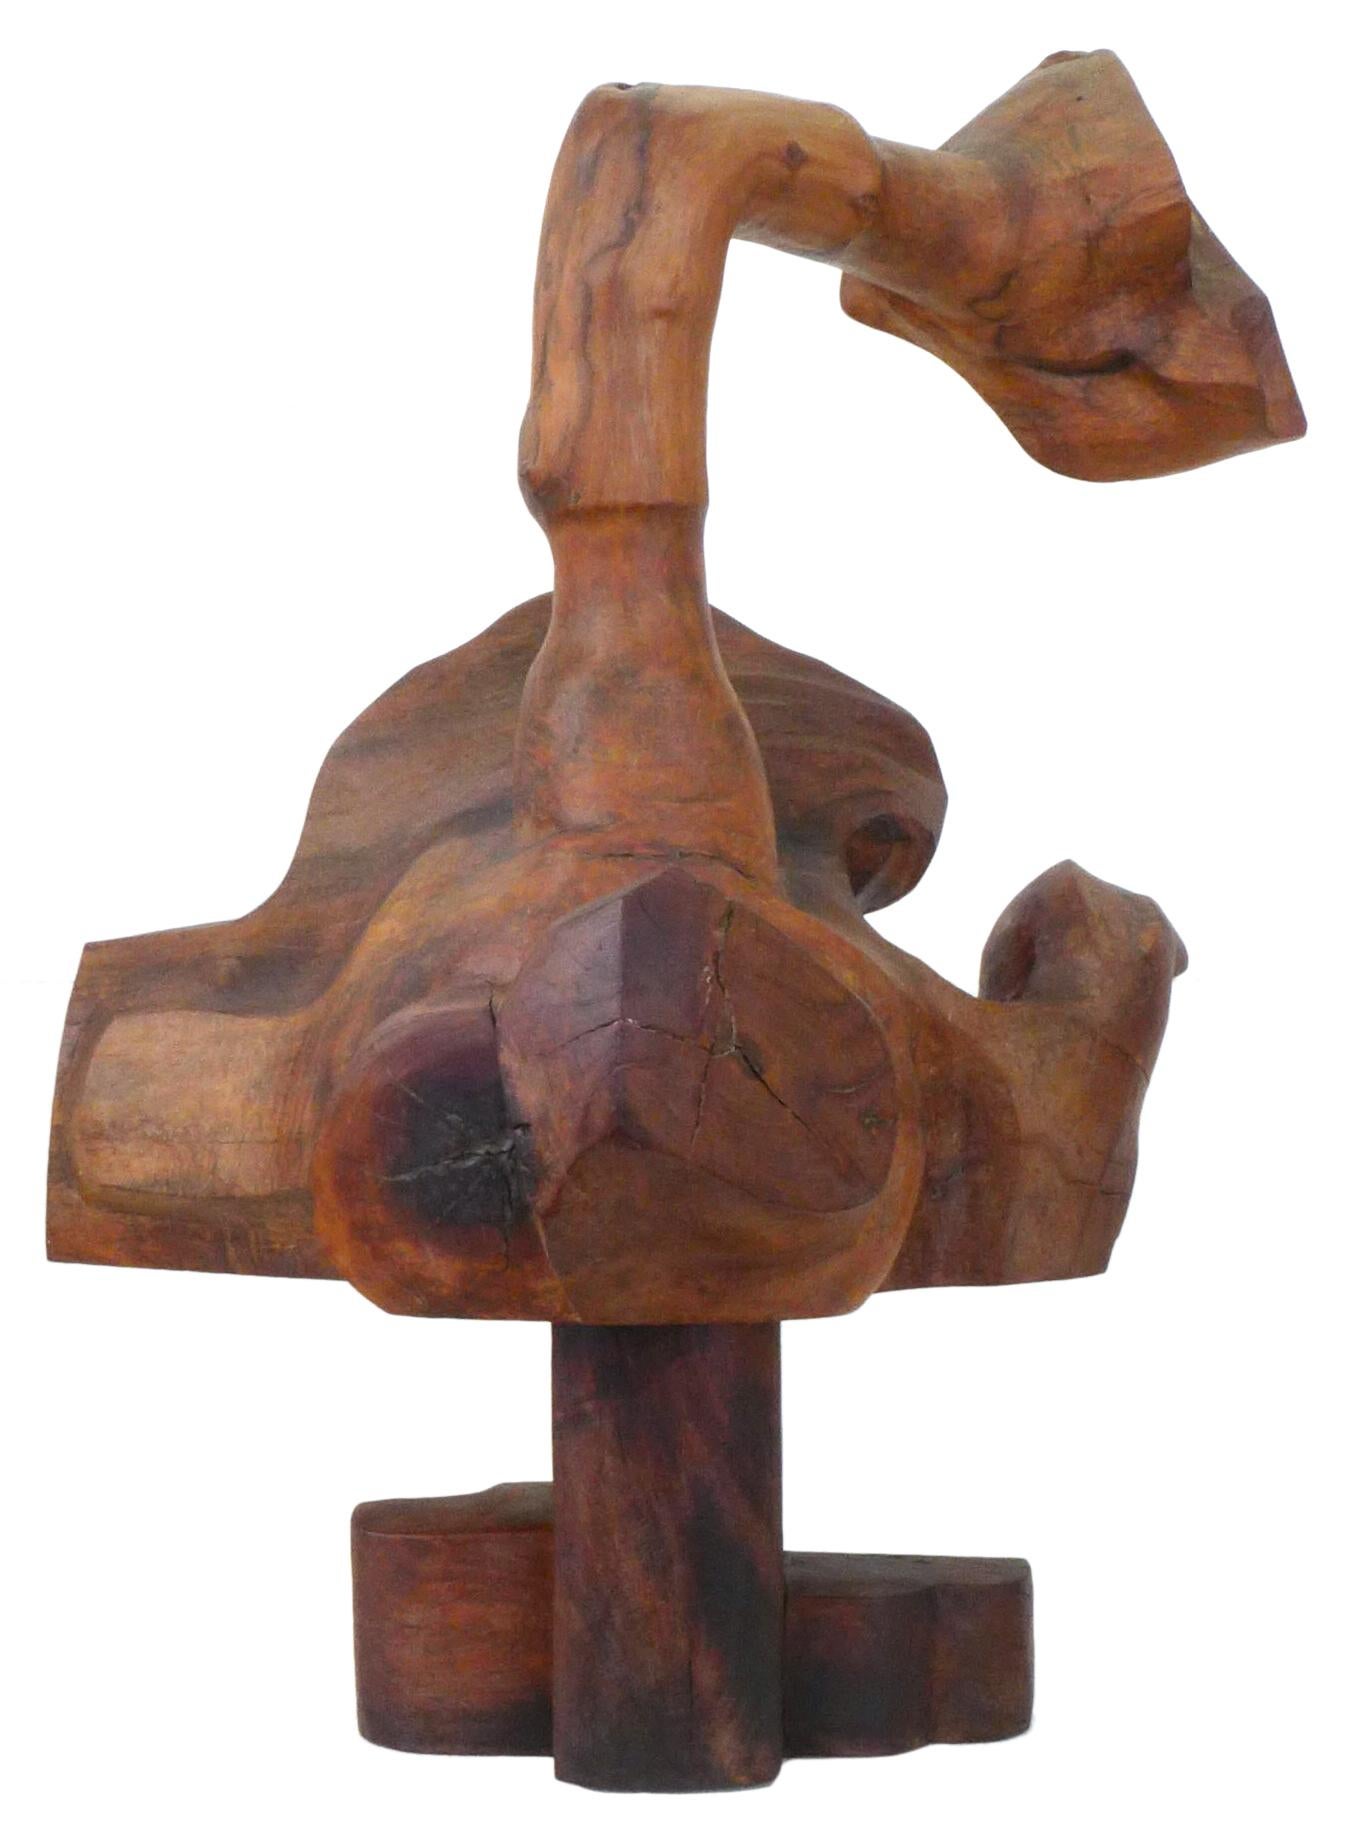 North American Organic Design Carved Wood Sculpture For Sale